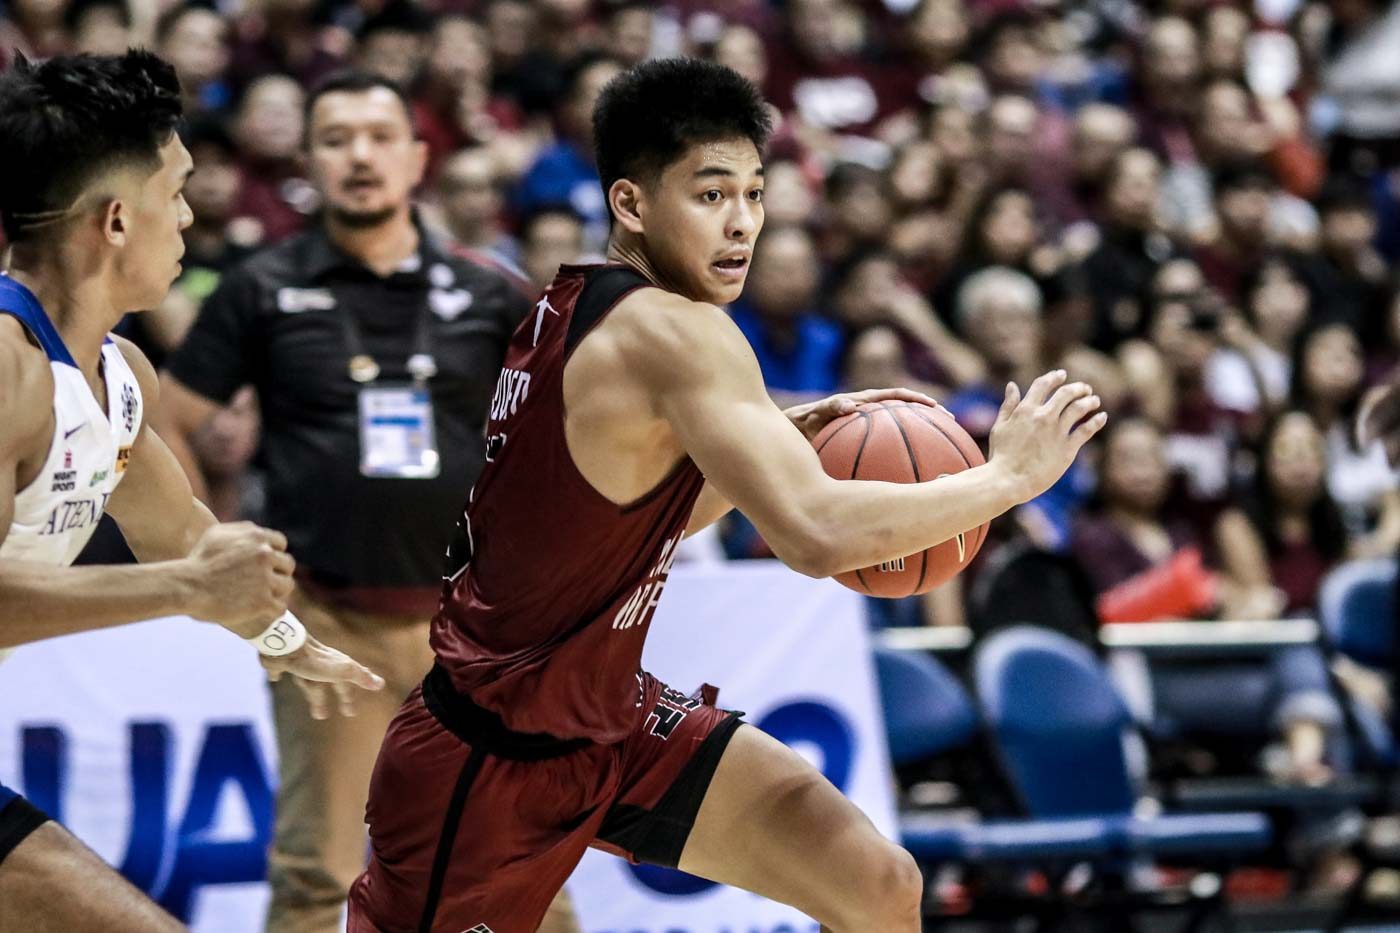 Rivero embraces defensive role in Maroons’ Final Four return